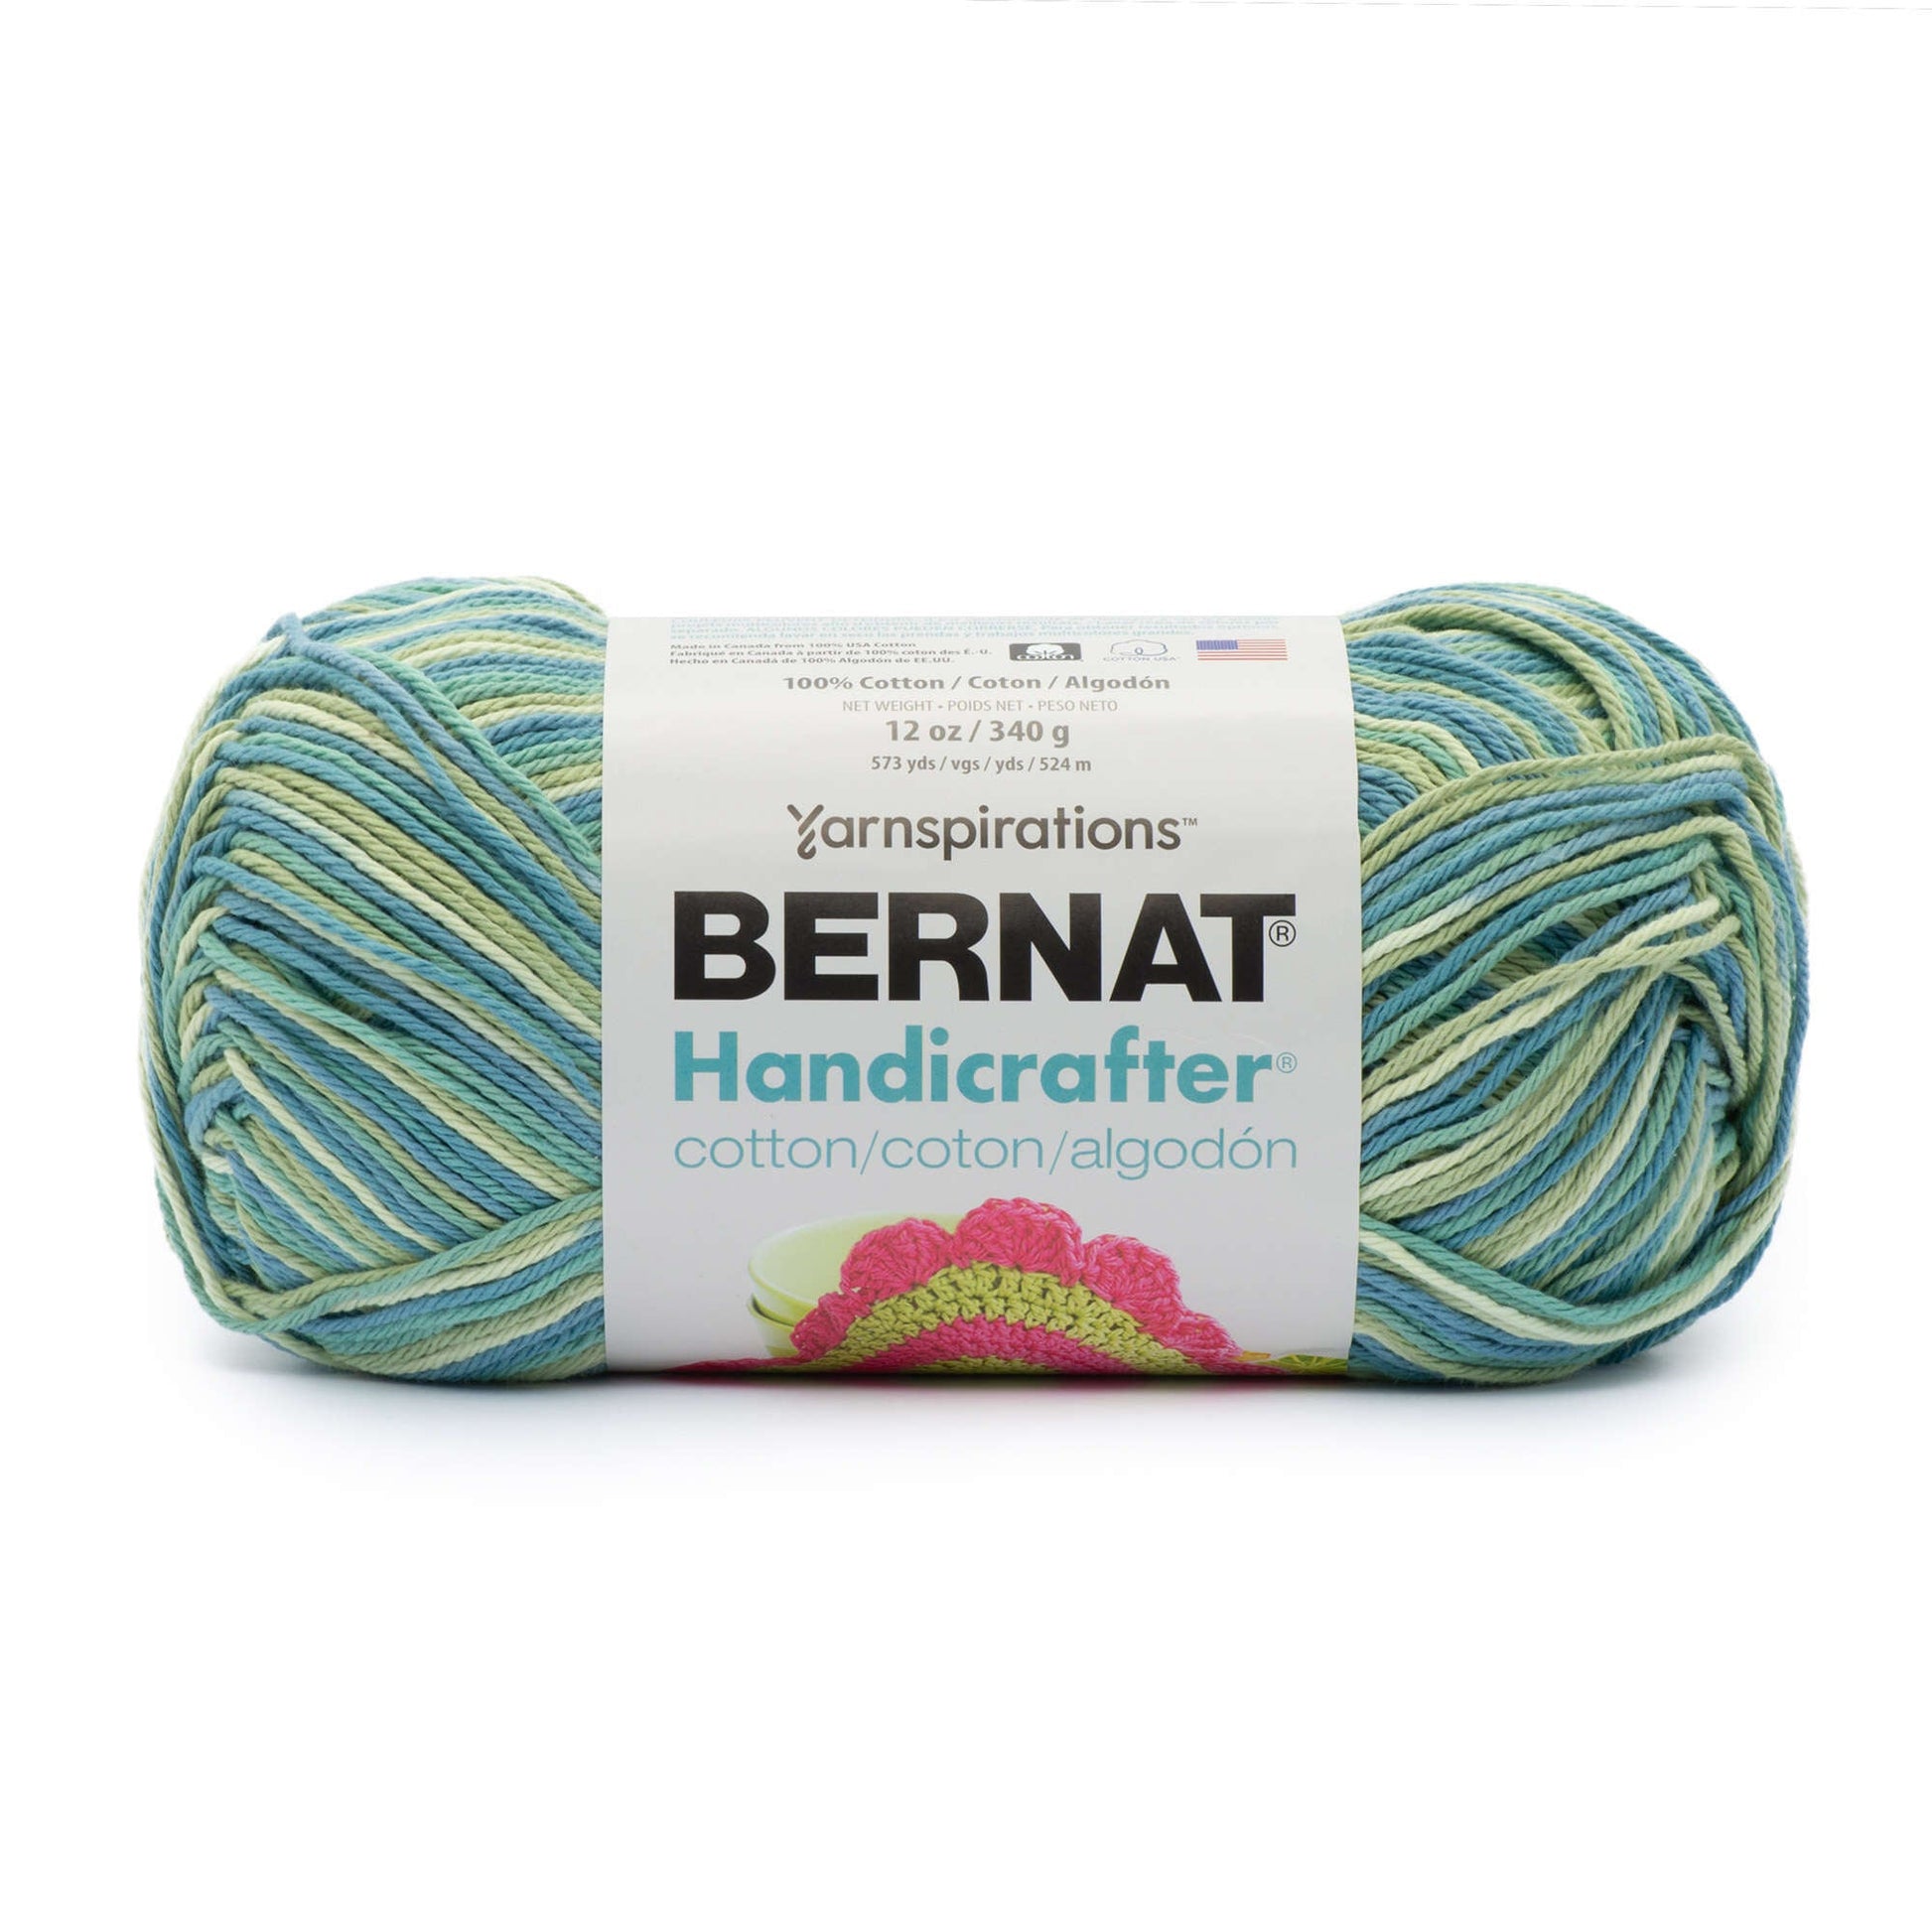 Bernat Handicrafter Cotton Yarn 340g - Ombres-Coral Seas, 1 count